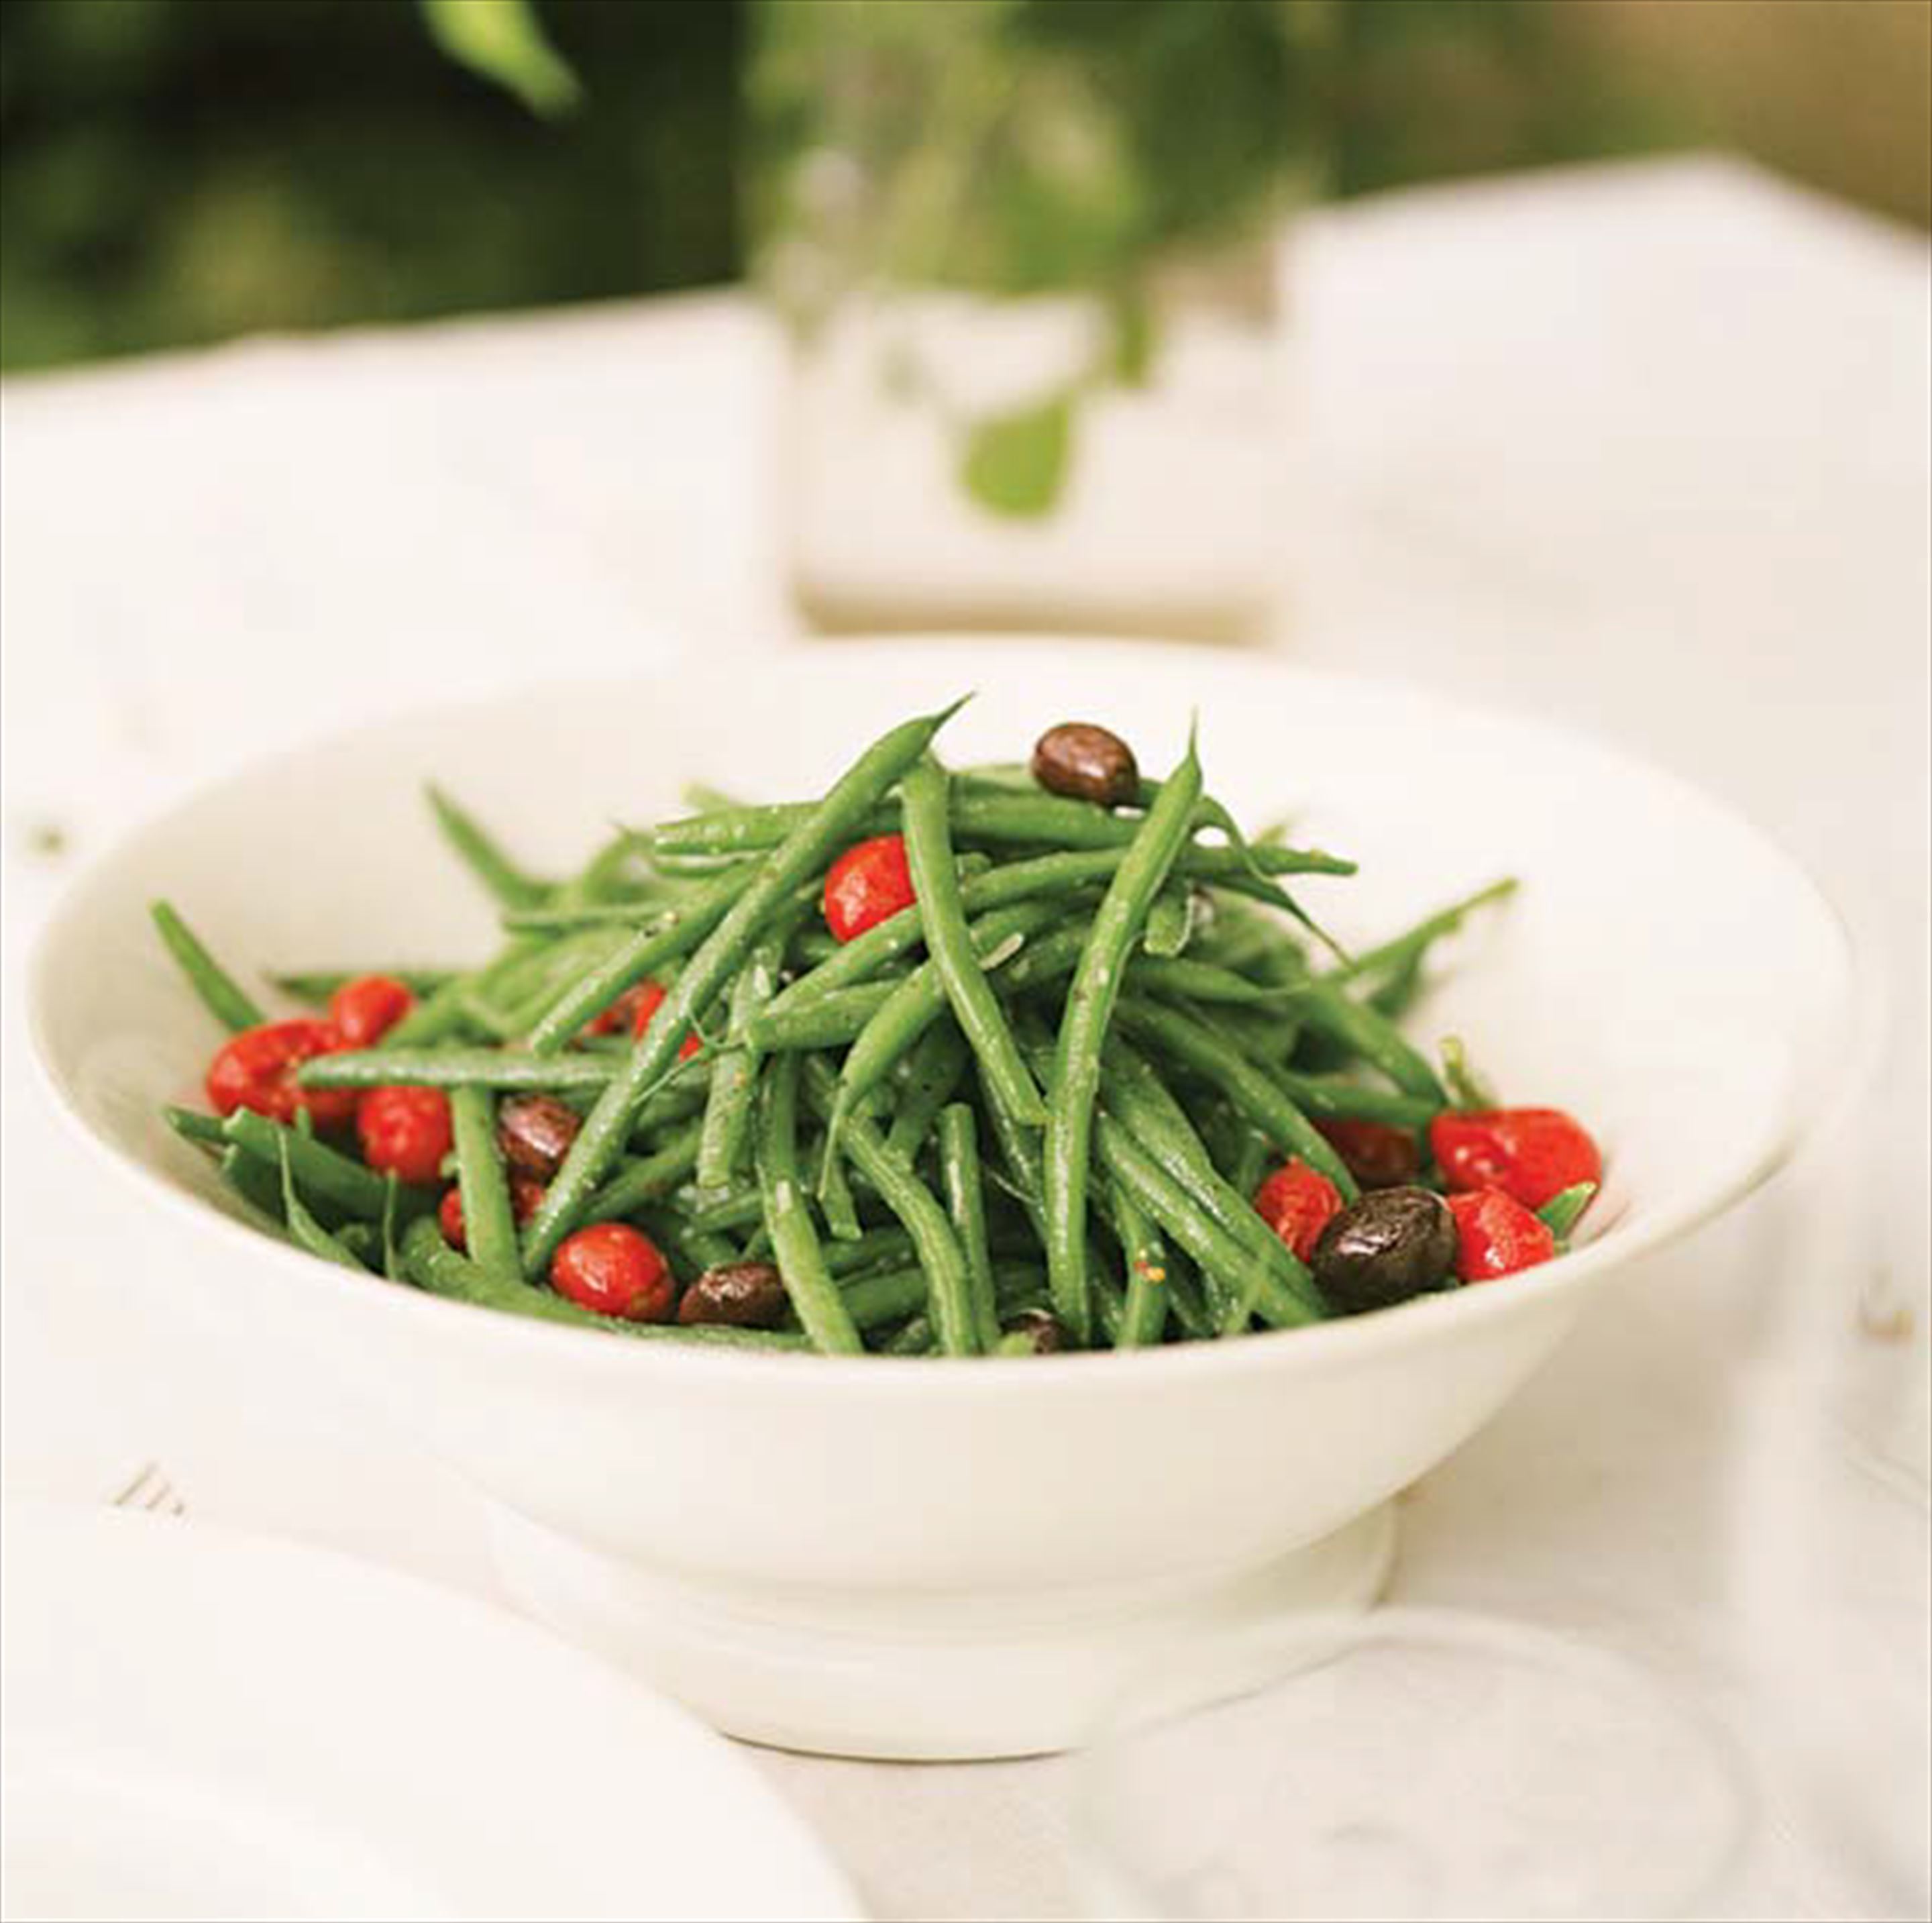 Green beans with roasted tomatoes and olives